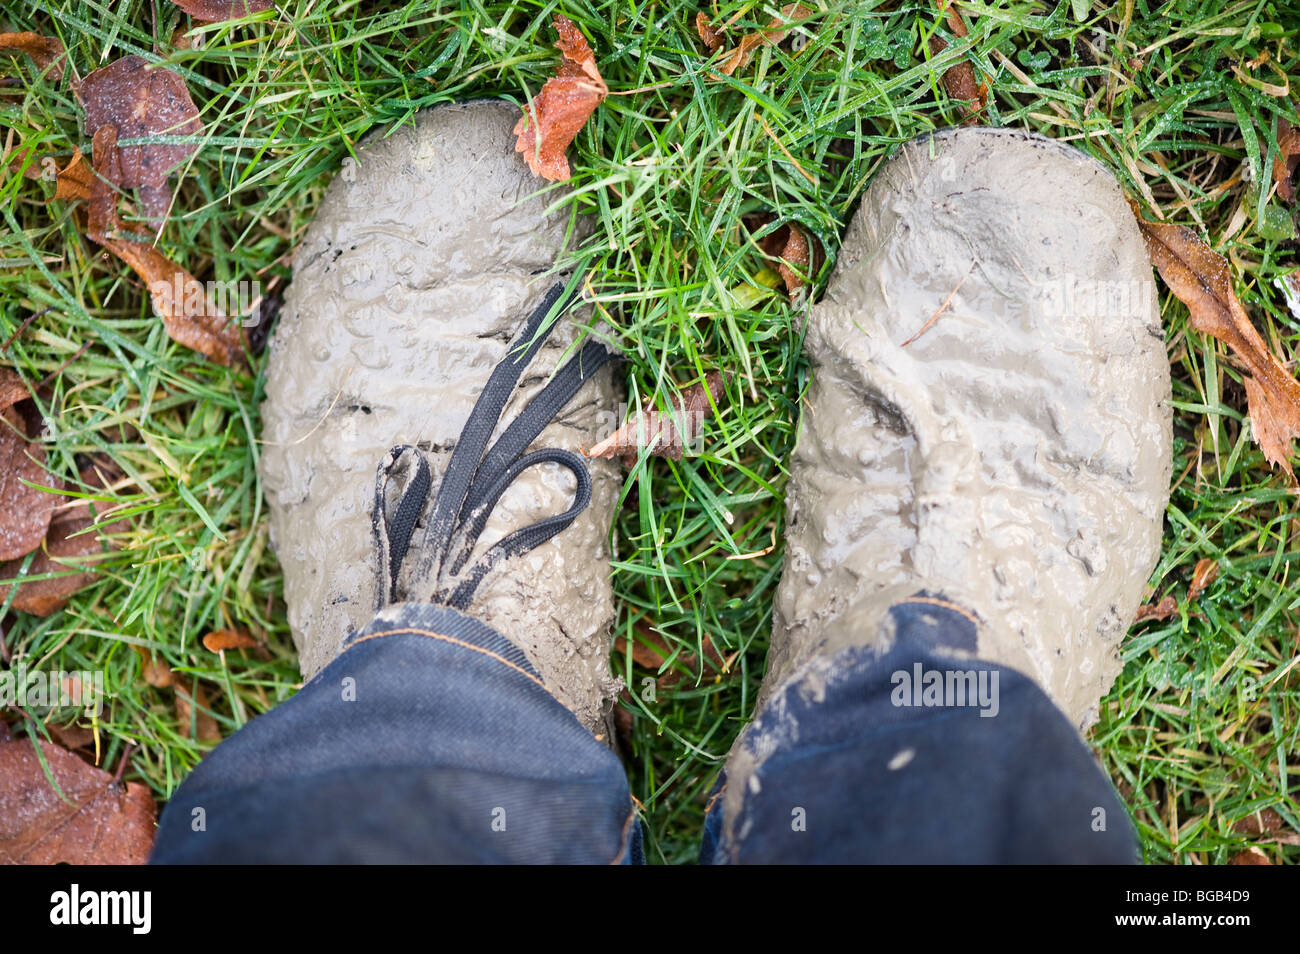 Shoes covered in mud. Stock Photo